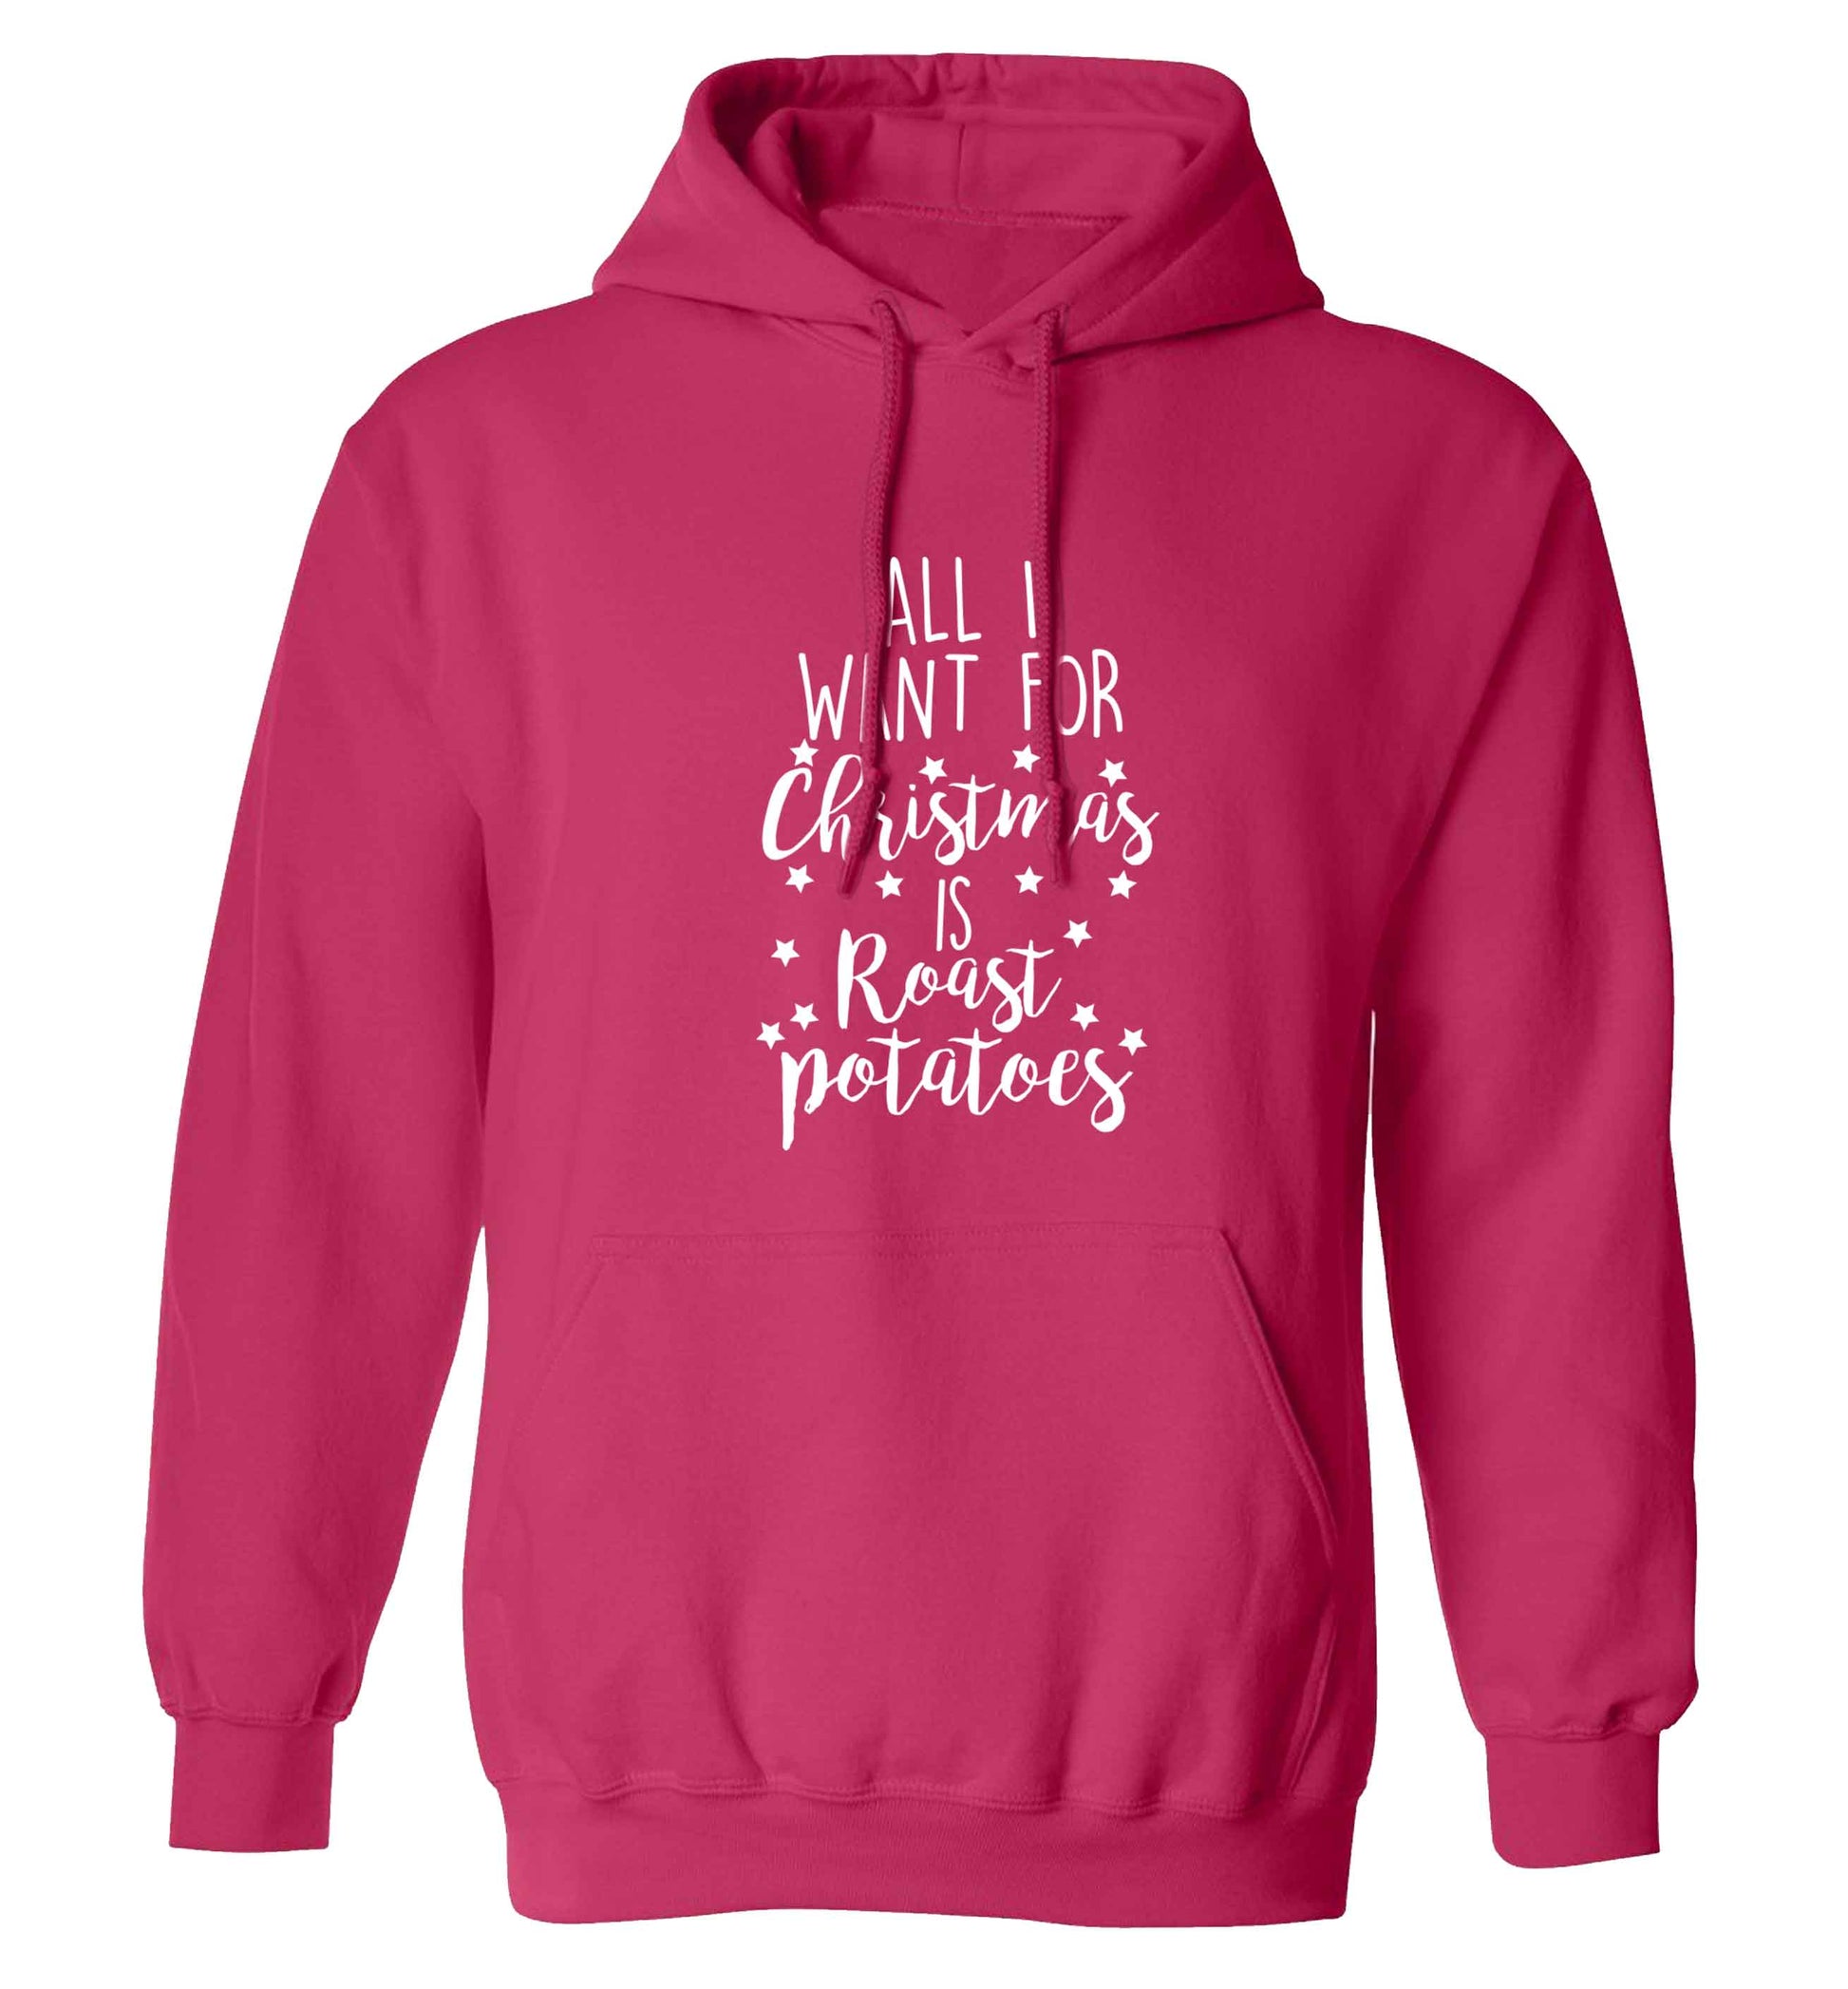 All I want for Christmas is roast potatoes adults unisex pink hoodie 2XL